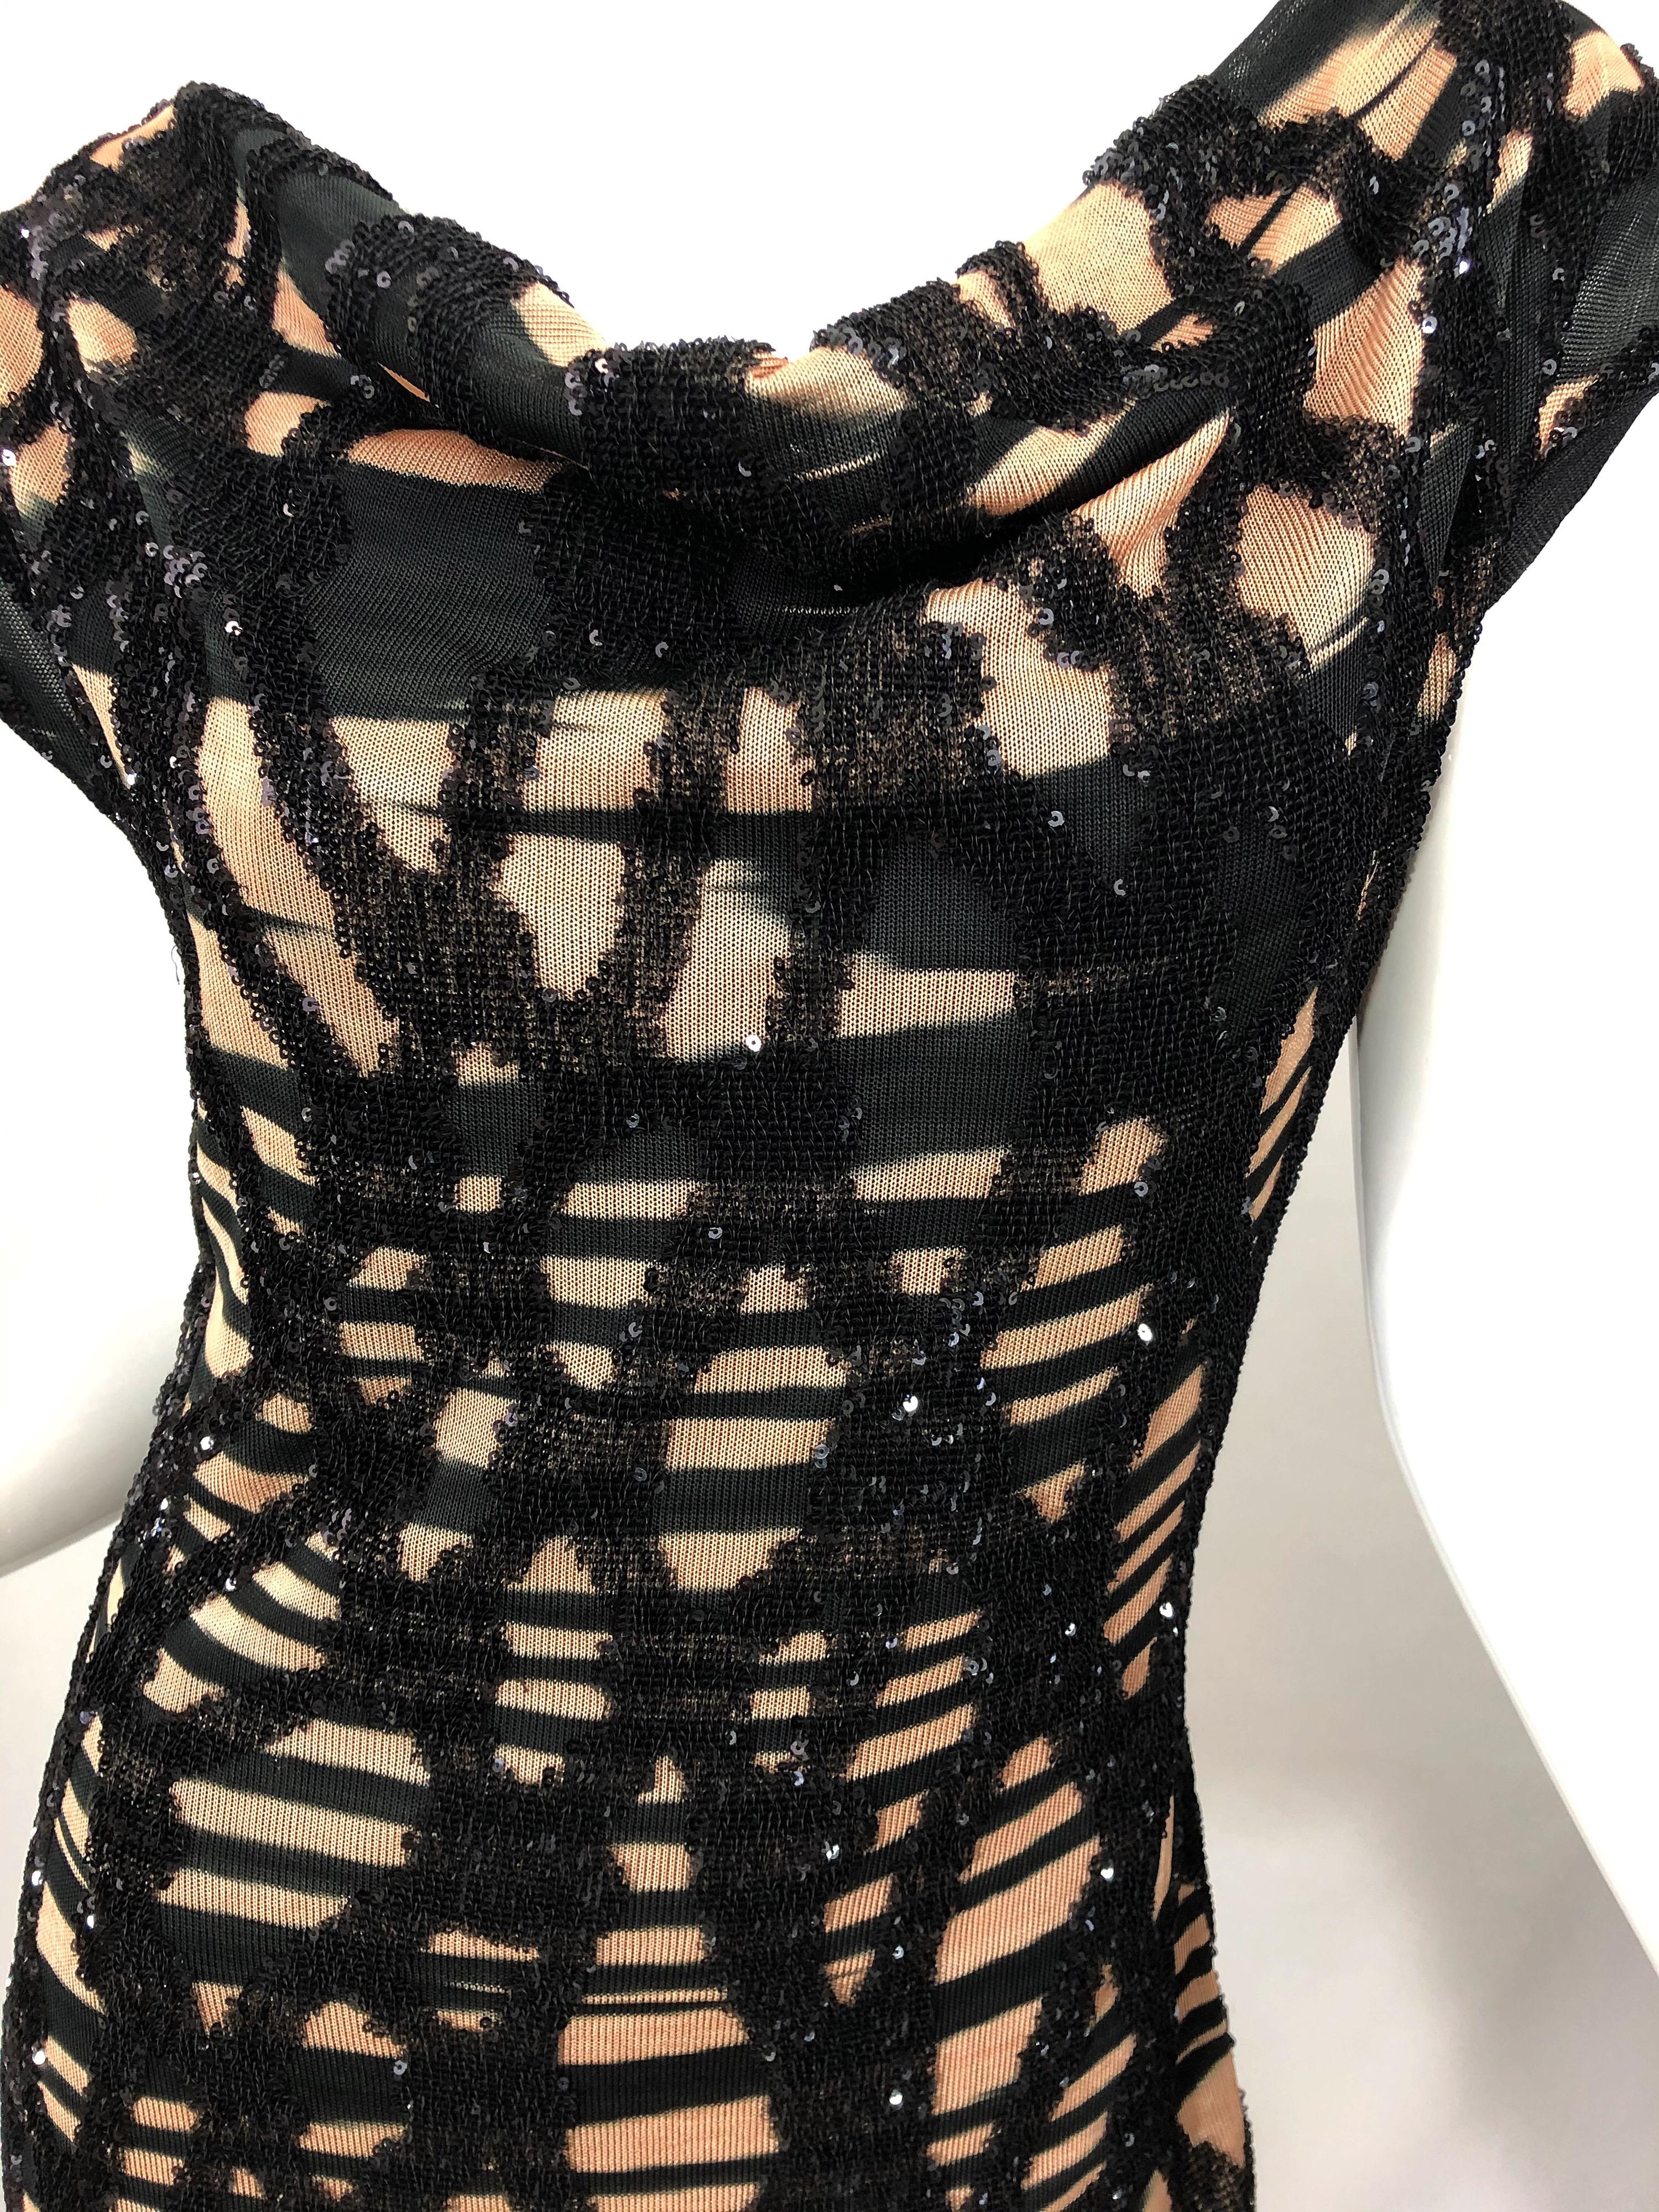 Missoni Early 2000s Black + Nude Sequined Size 40 / 4 - 6 Abstract Mini Dress For Sale 3